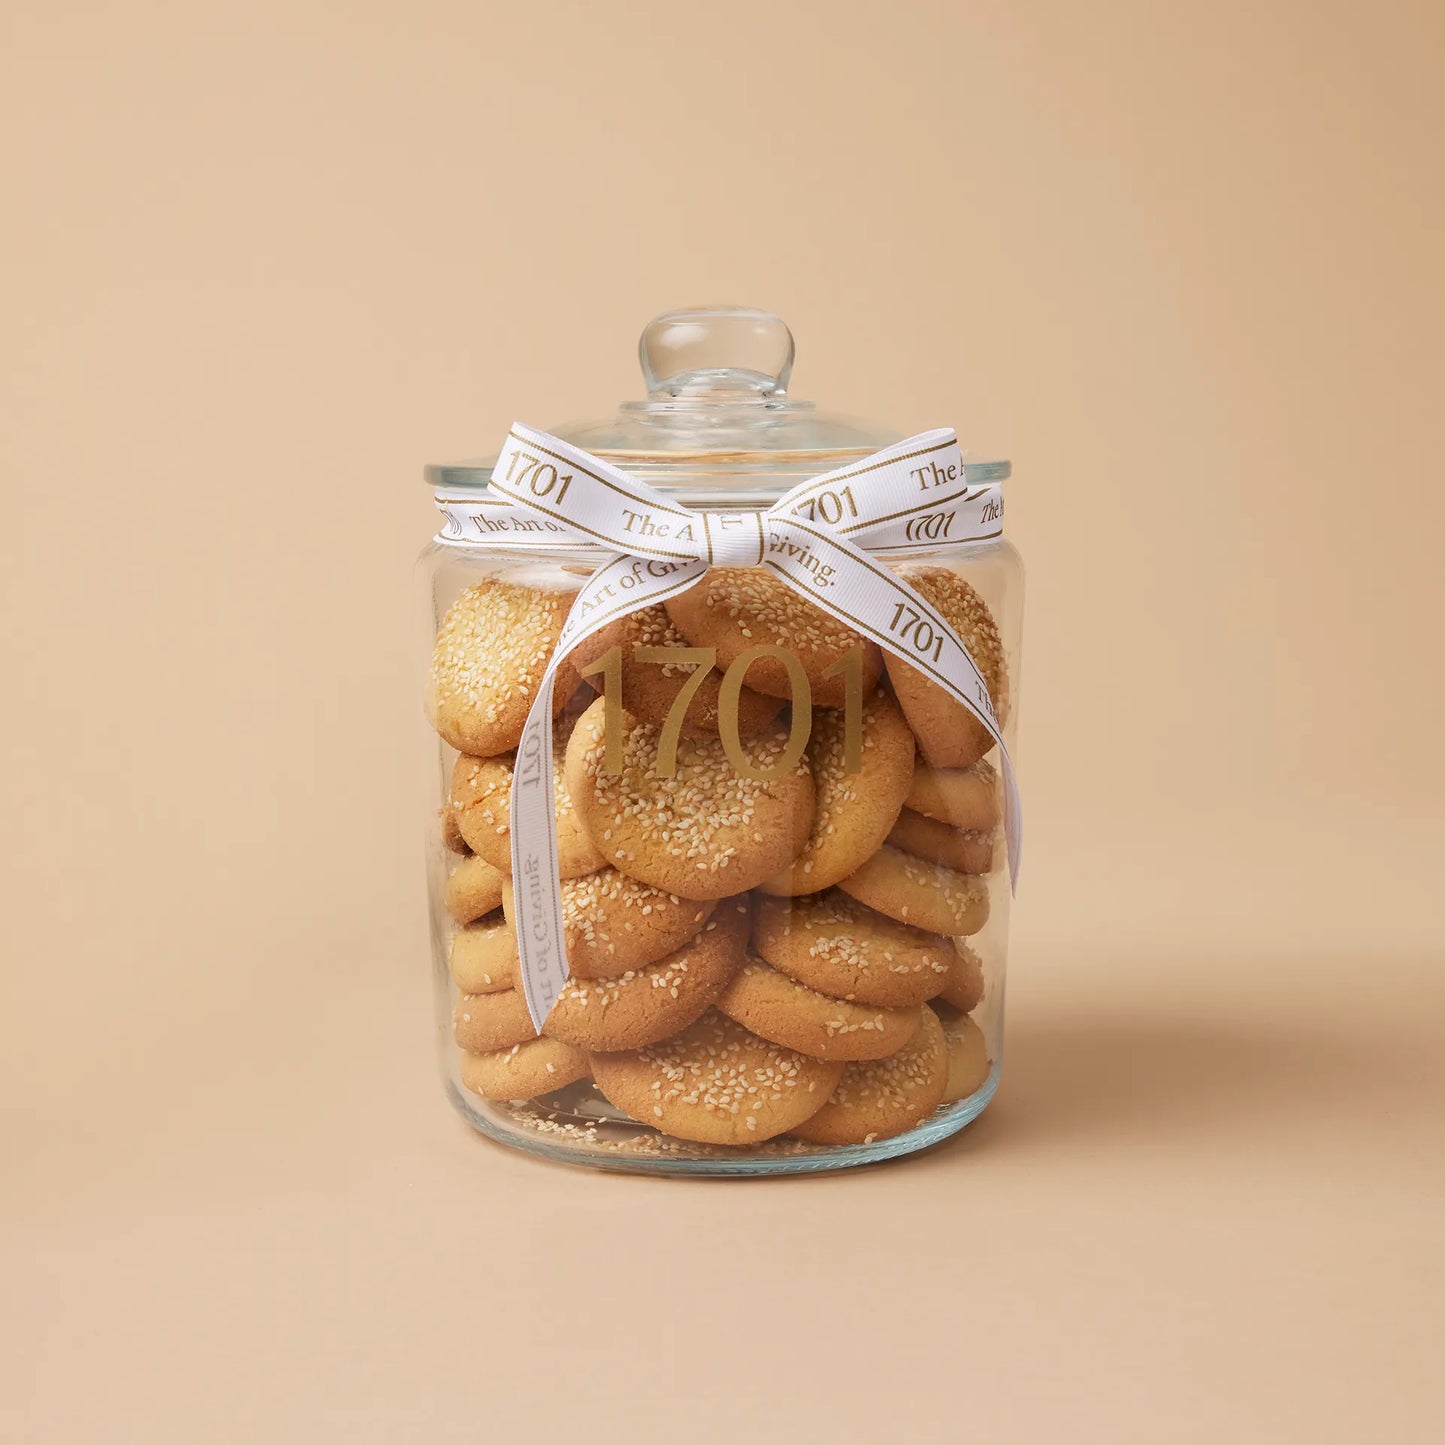 A glass jar filled with sesame seed shortbread rounds. The jar is tied with a ribbon and has a label with the name of the biscuits and the SANHA Halaal approved logo.